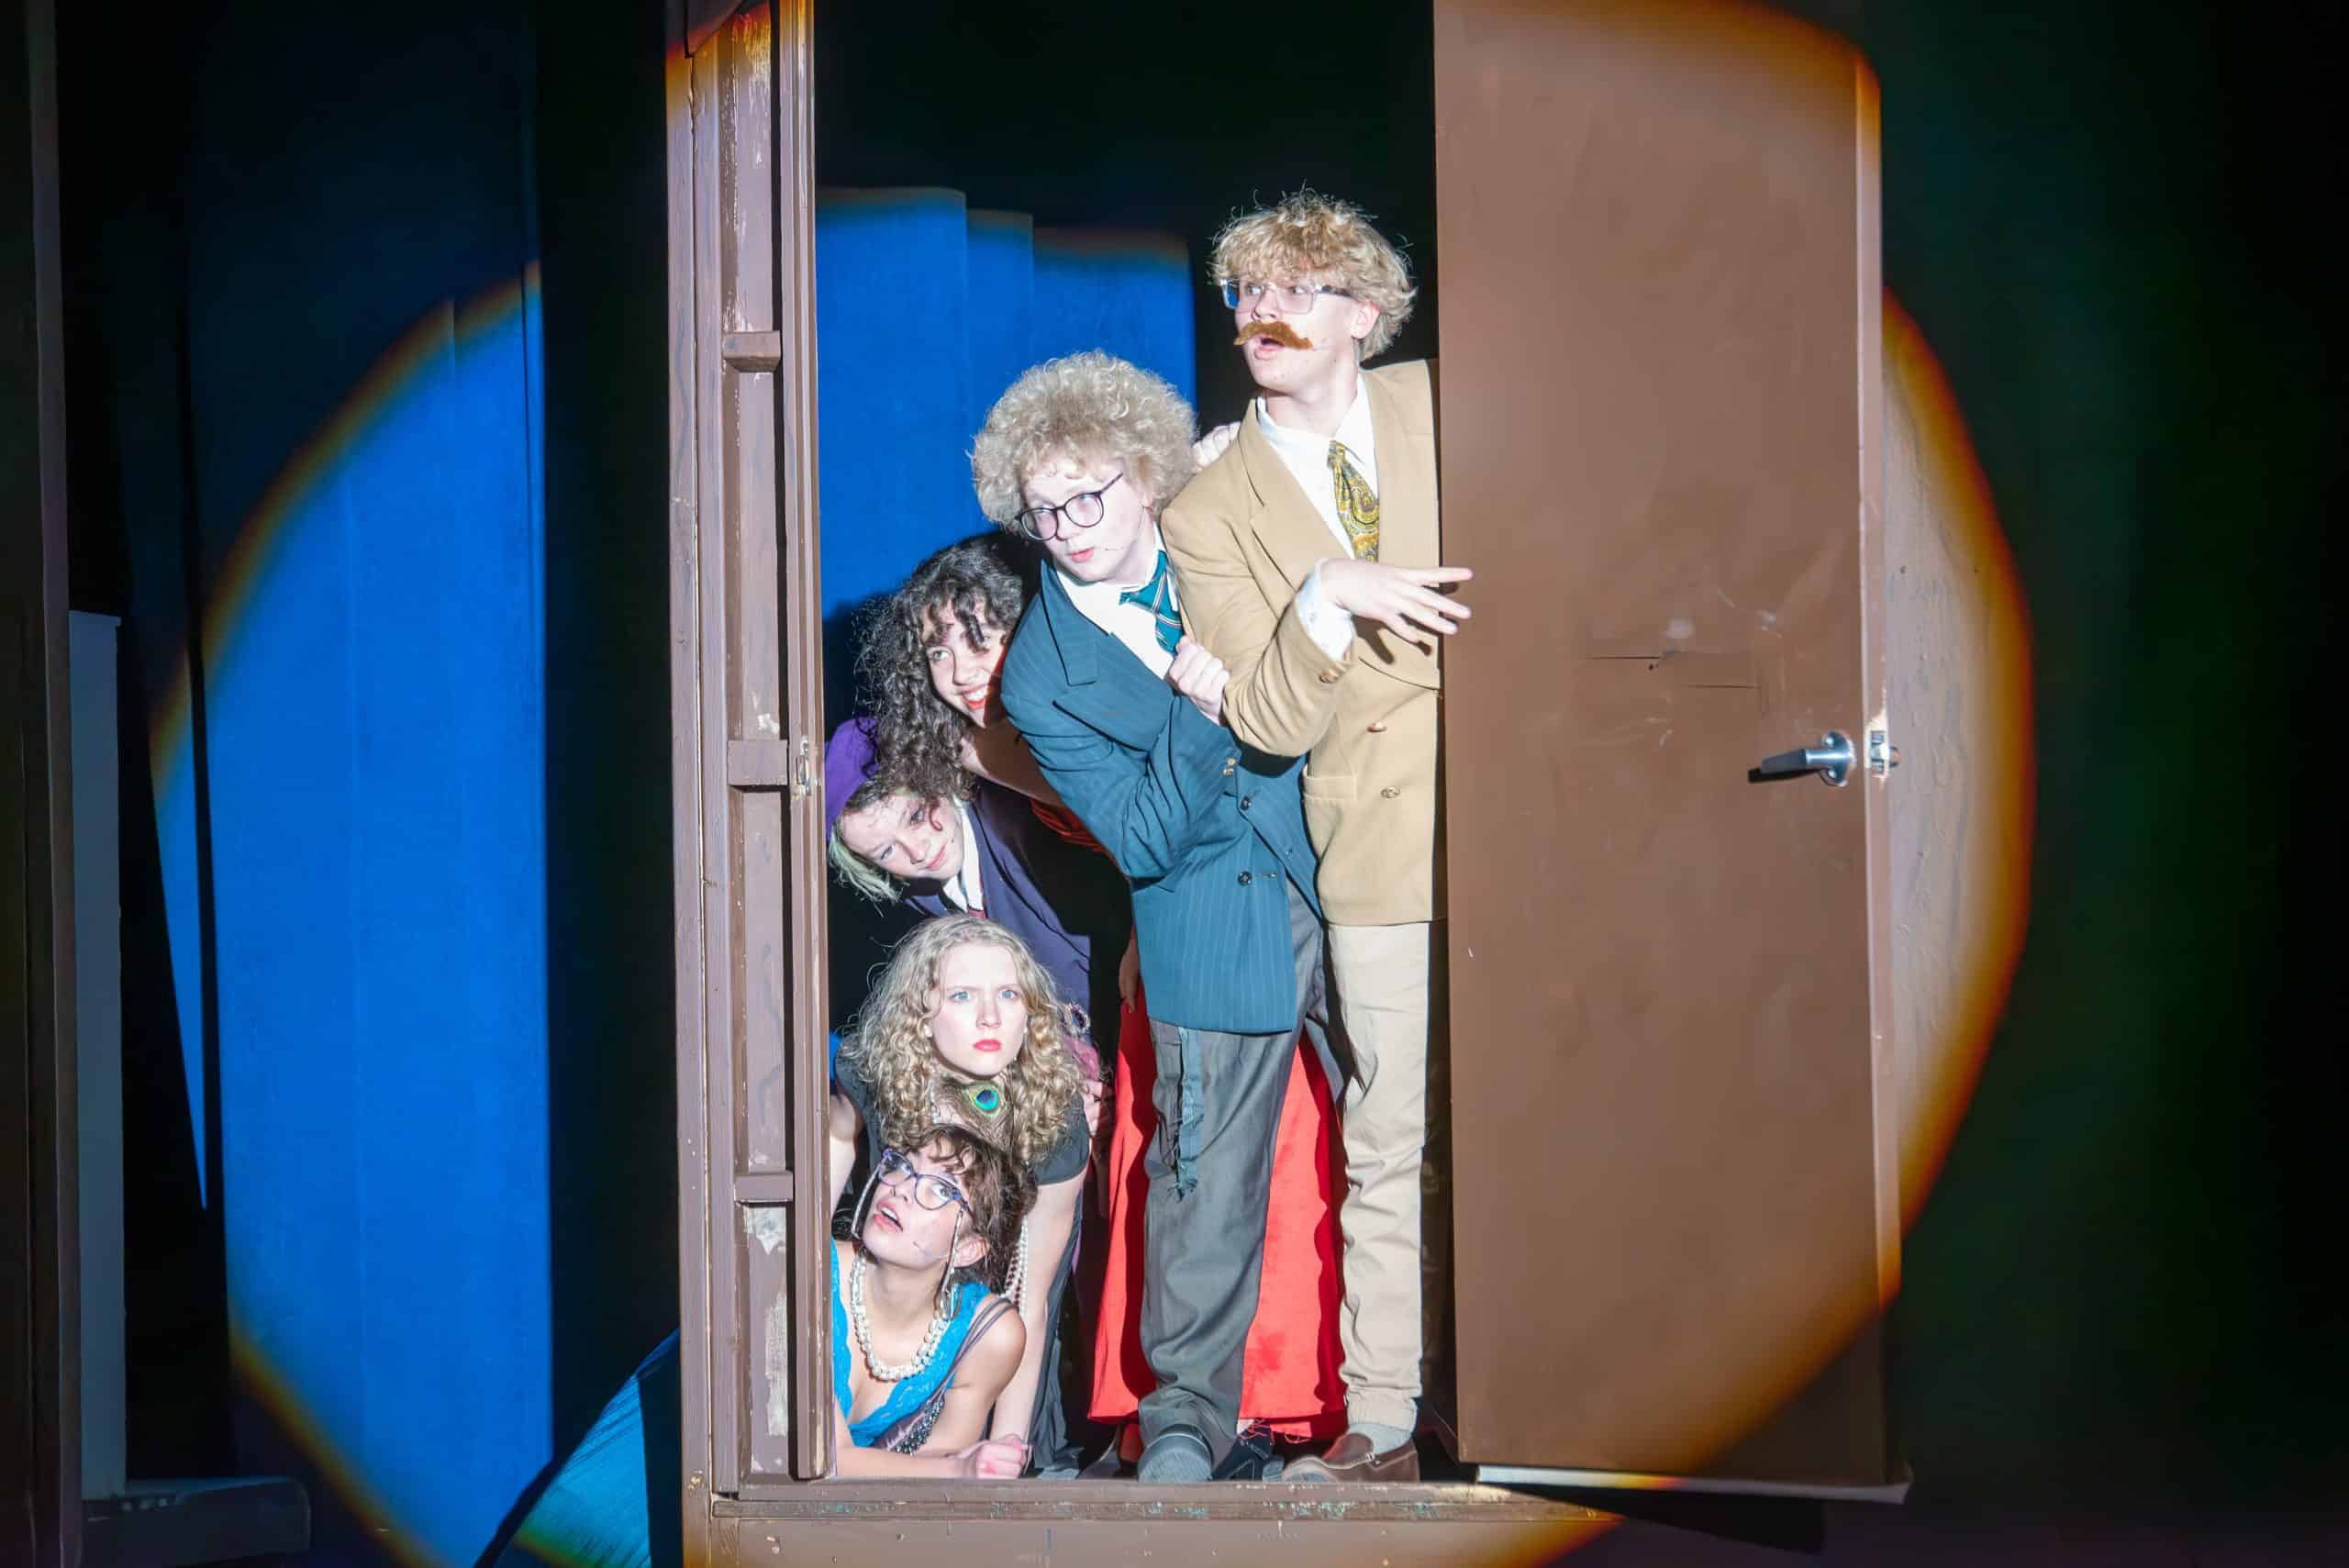 Six Longmont drama club students peeking outside of a door on the set of the stage. A girl is laying on the floor and the other students are stacked above her from sitting to standing.